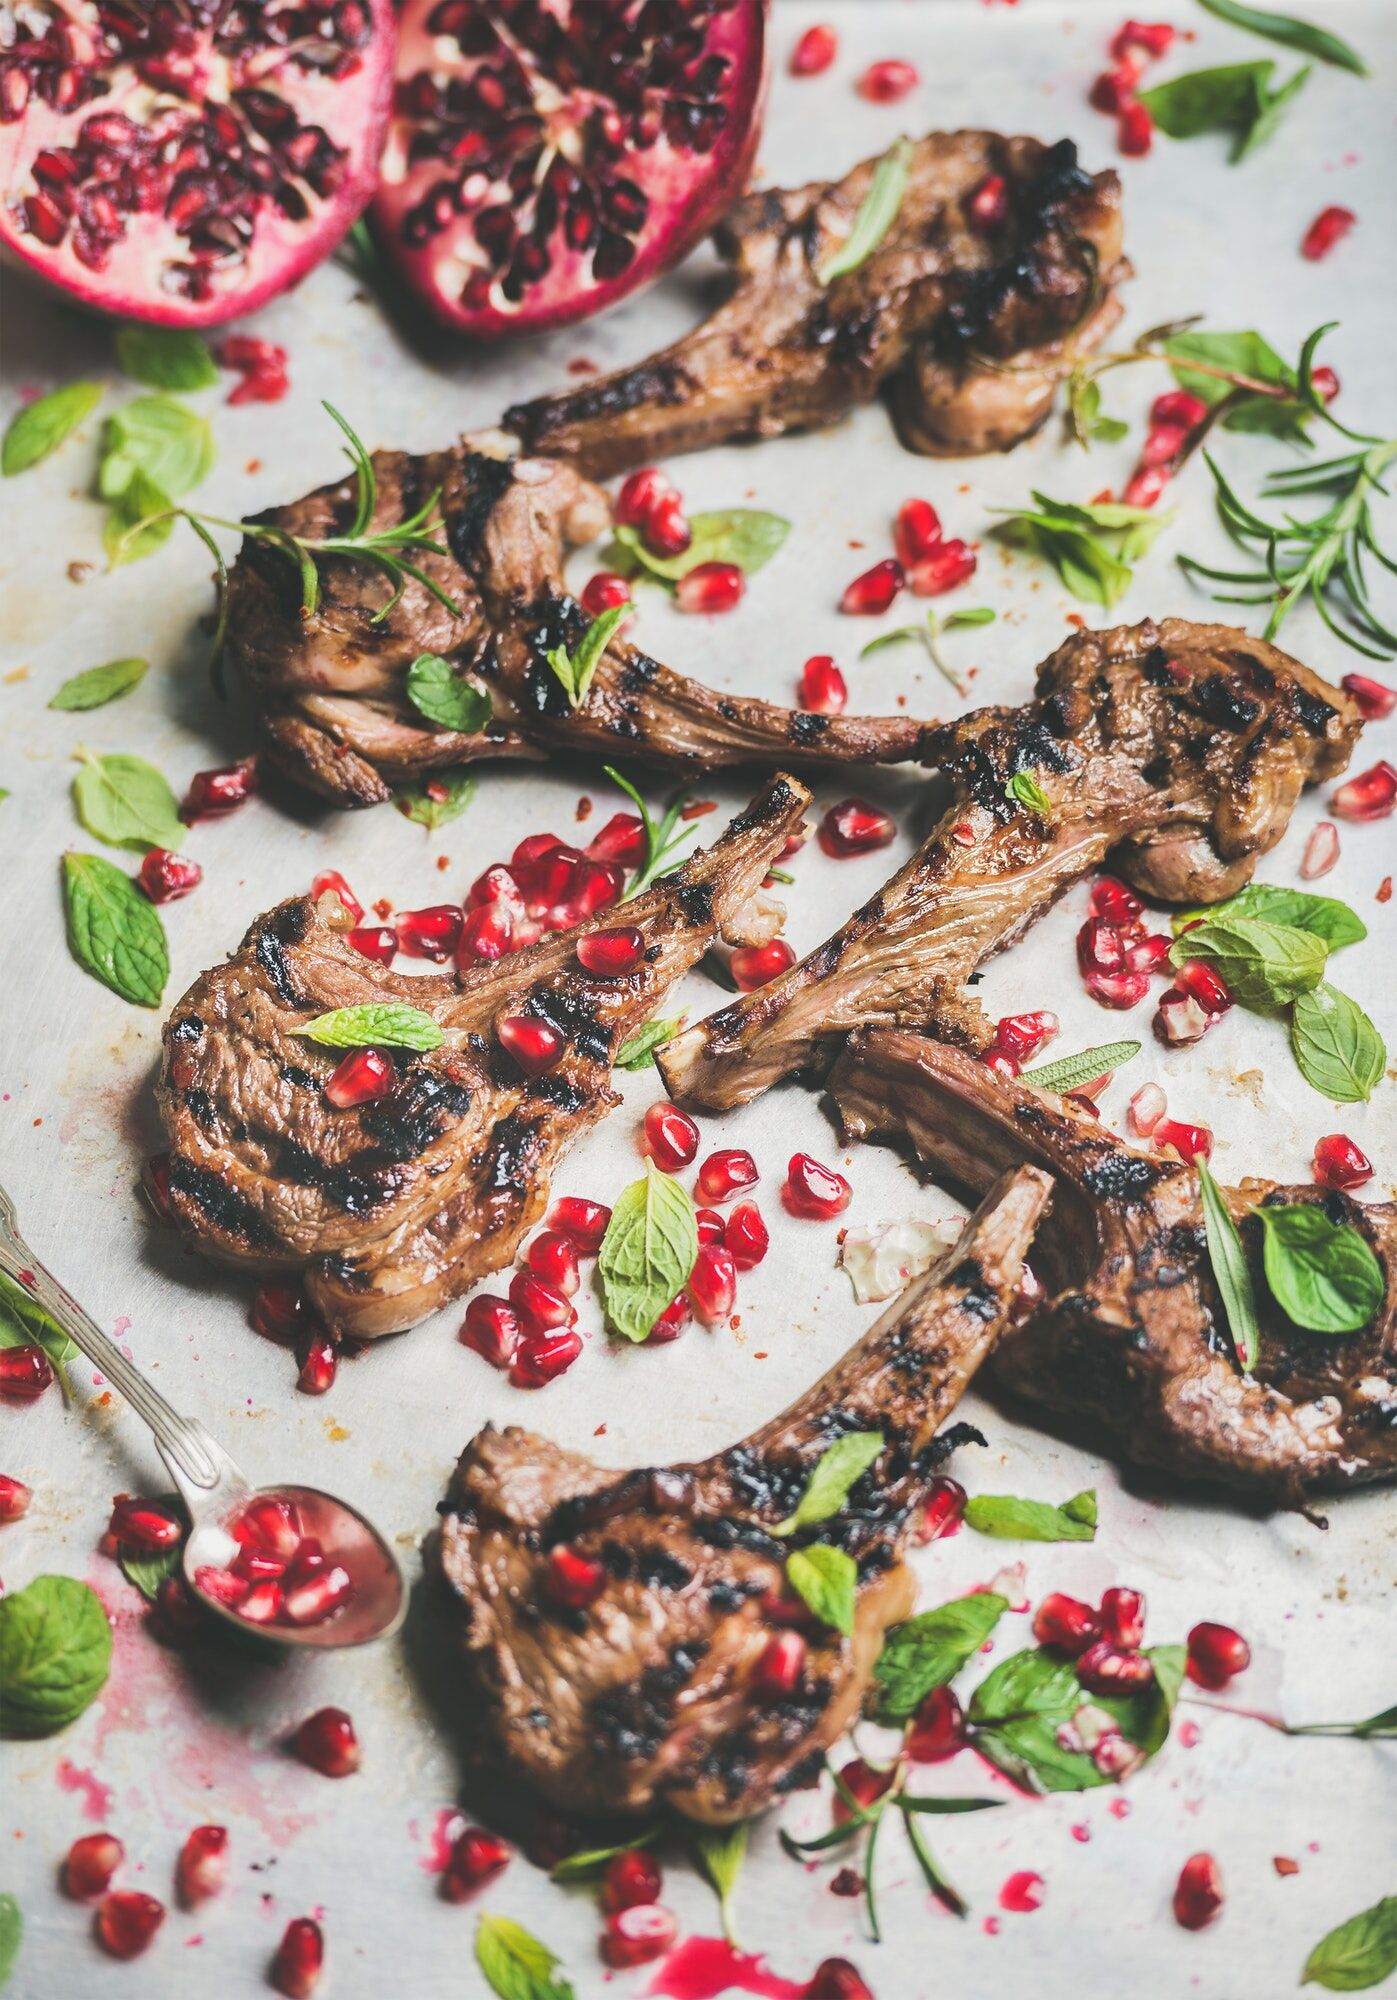 Grilled lamb ribs with pomegranate seeds, fresh mint and rosemary